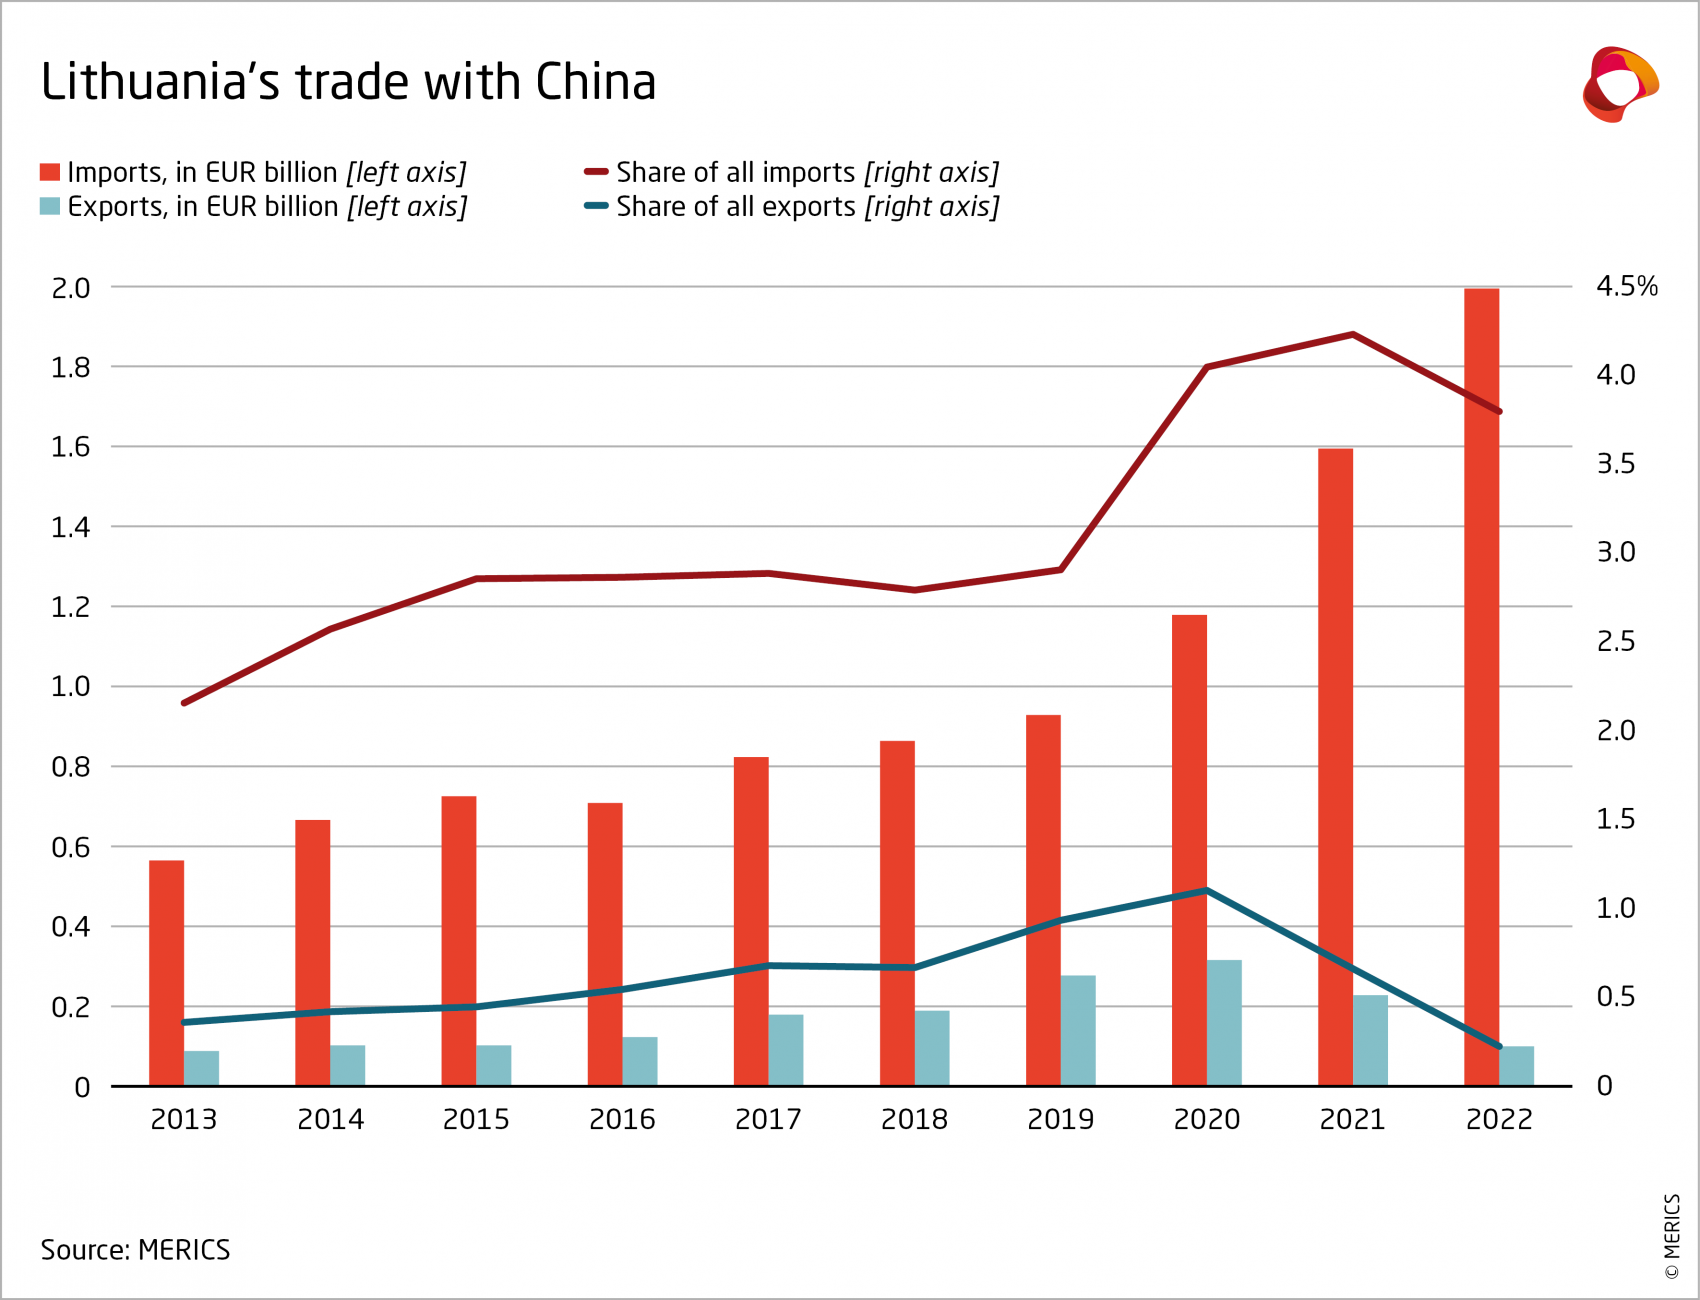 Lithuania's trade with China